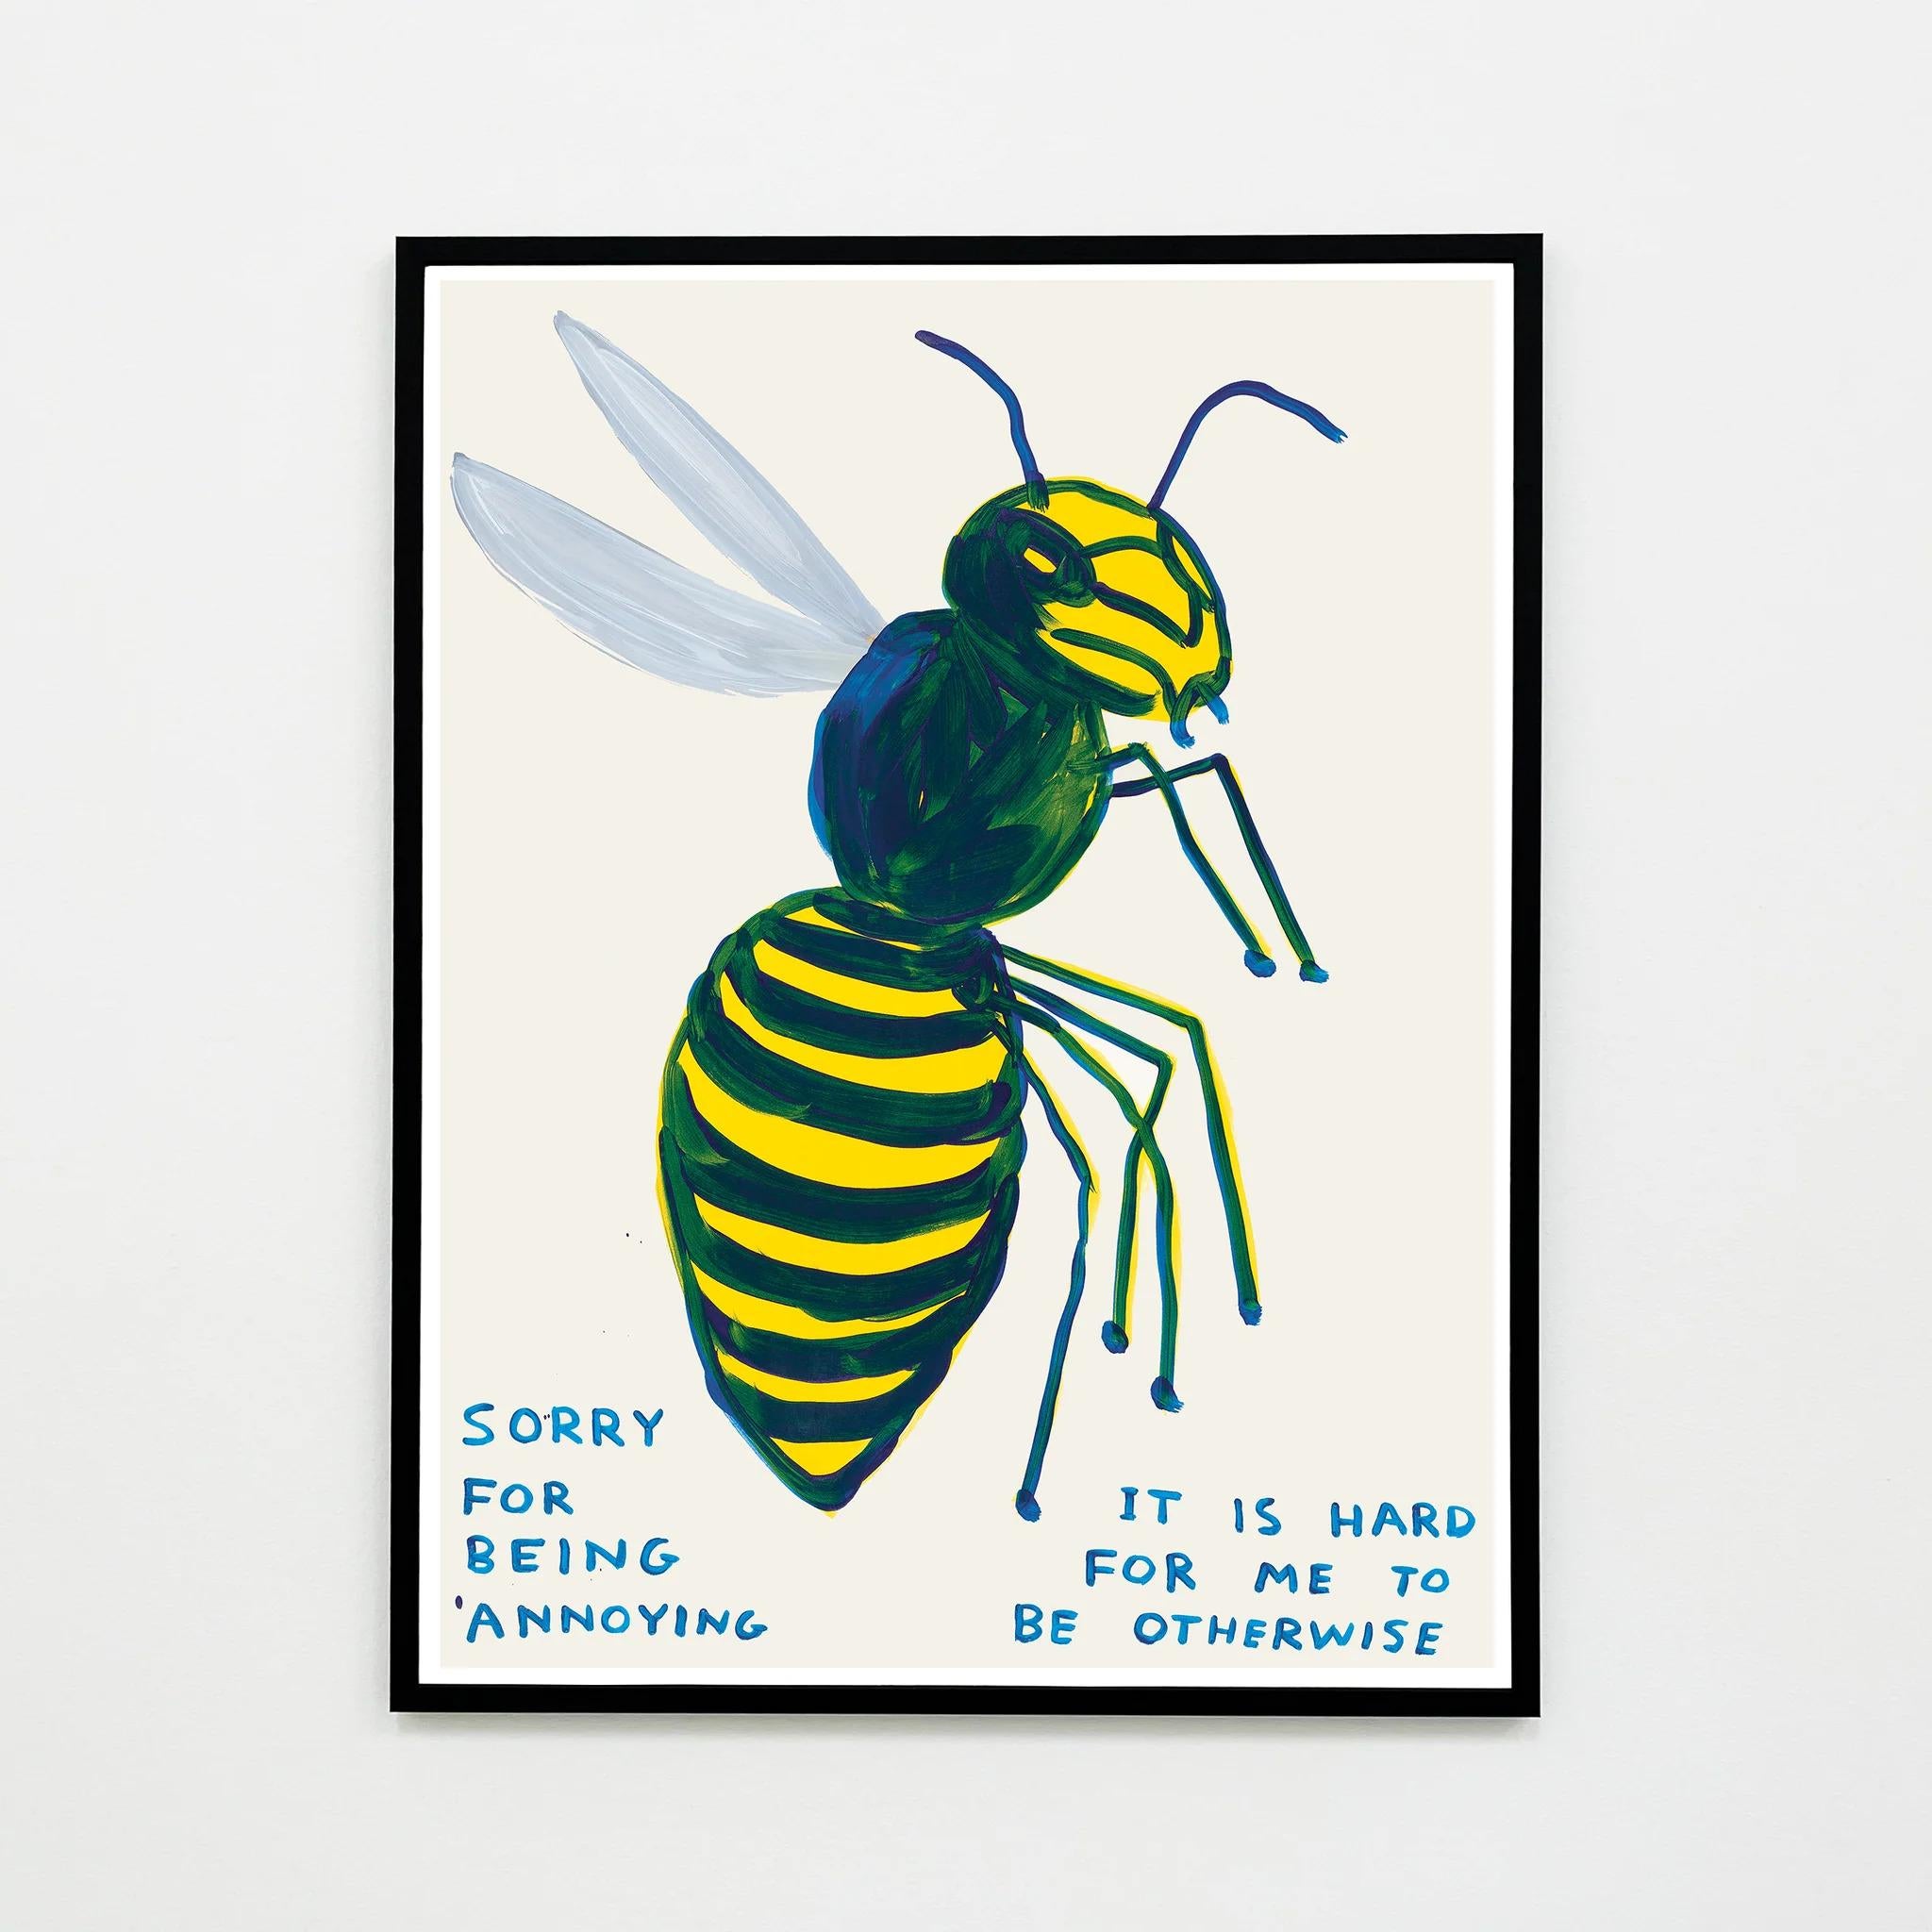 Off-set lithograph
Framed
64 x 84 cm (25.2 x 33.07 inches) 
Printed on 200g Munken Lynx paper by Narayana Press in Denmark 

This print is based on the original acrylic on paper work by Shrigley. Please note this item is framed, and can come in